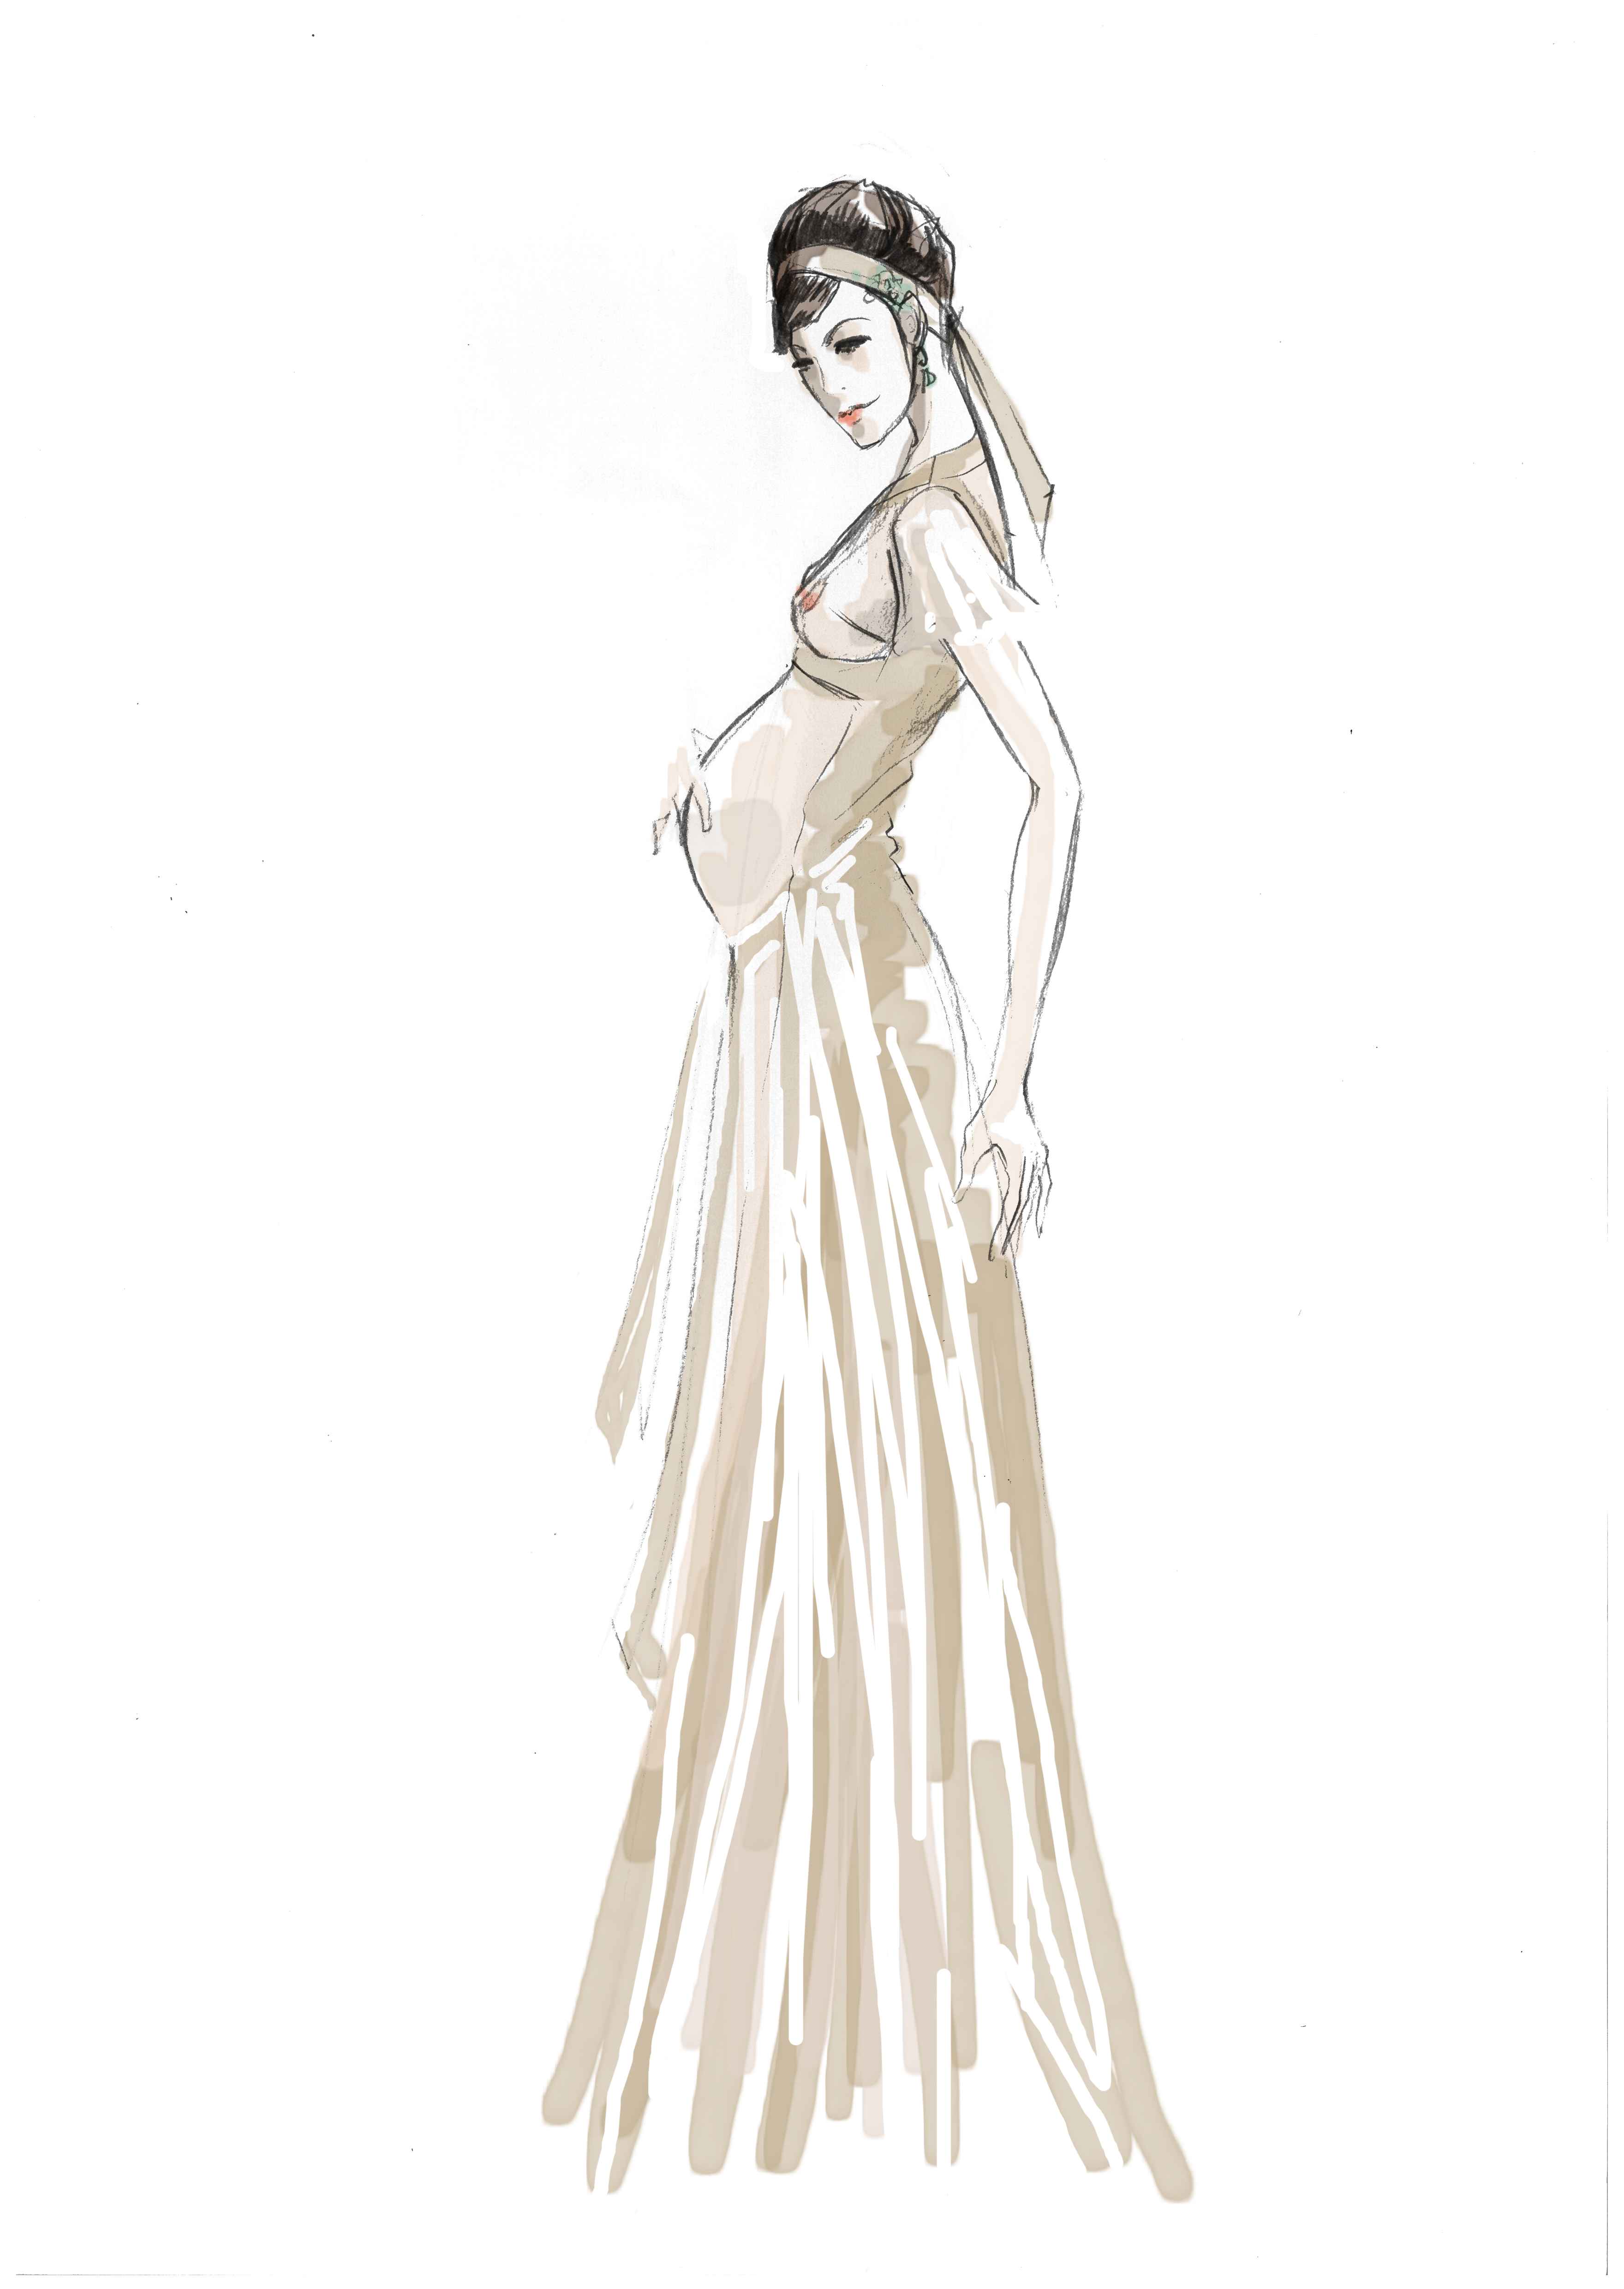 Rough for pregnancy gala dress | pencil on paper, digitally colored, ©2013